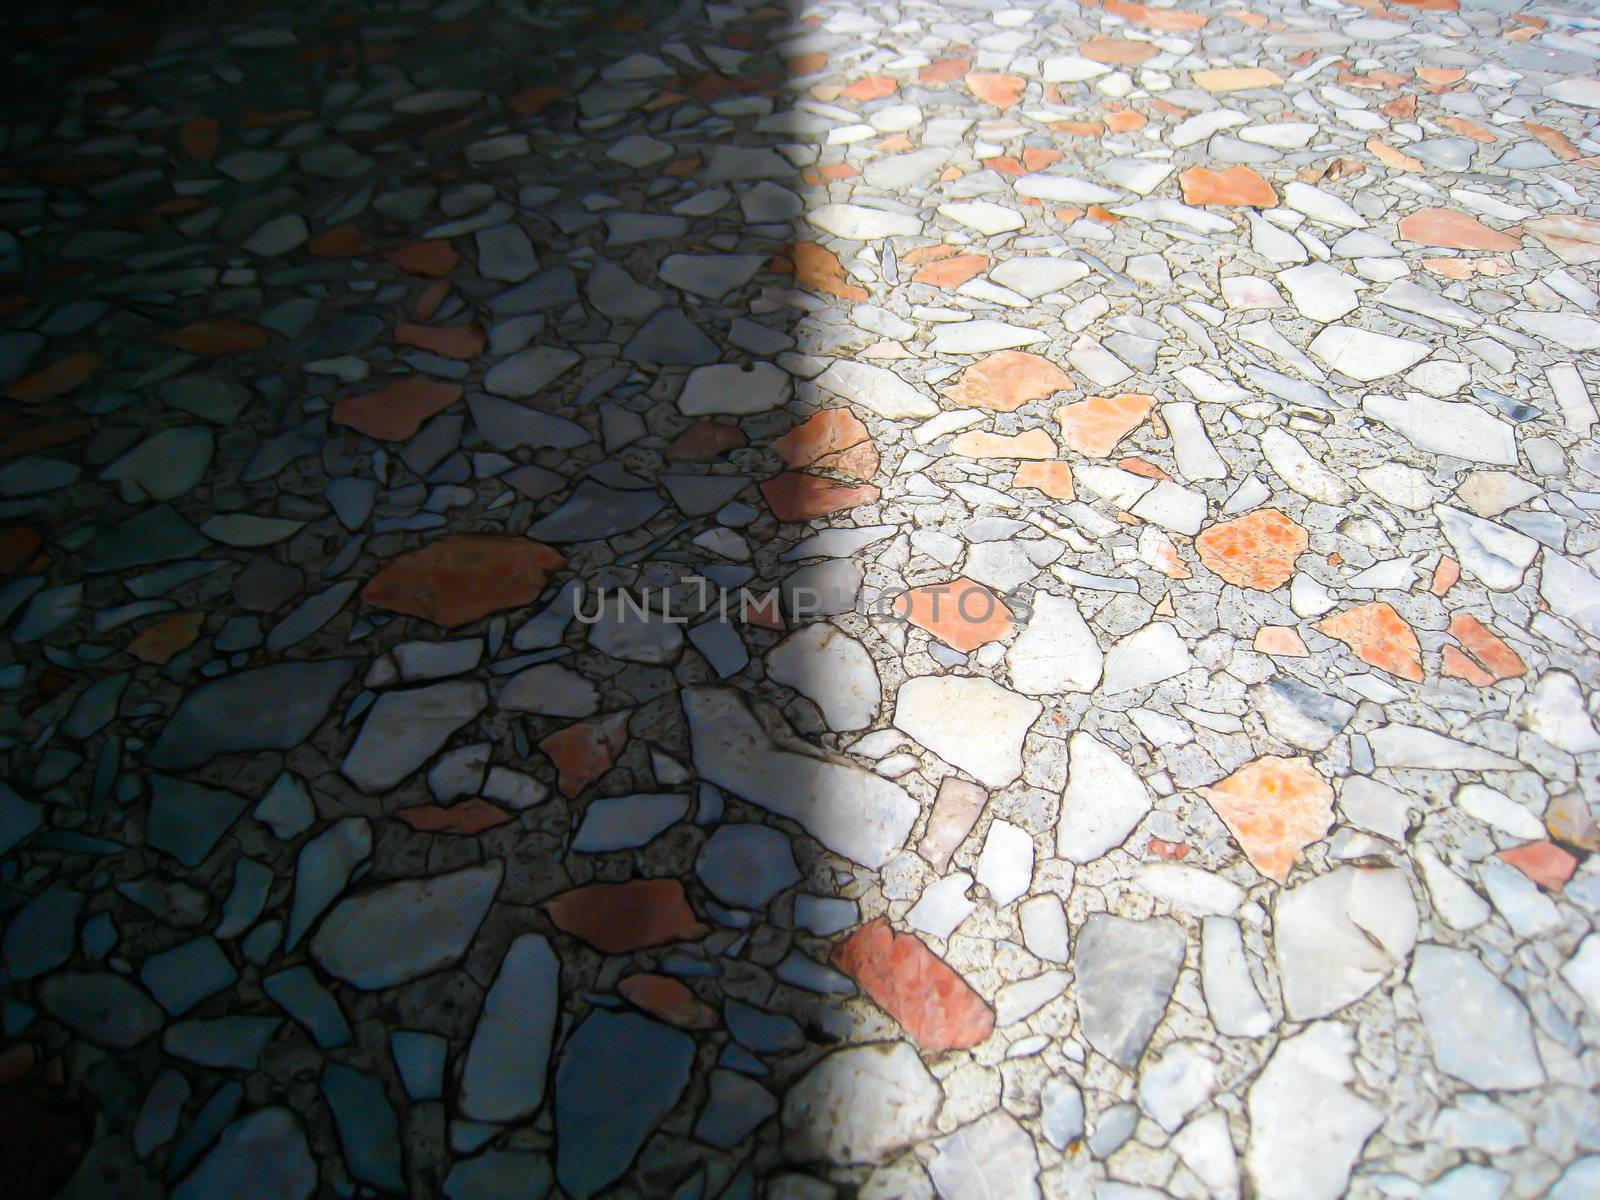 Shadow and hilight of marble floor